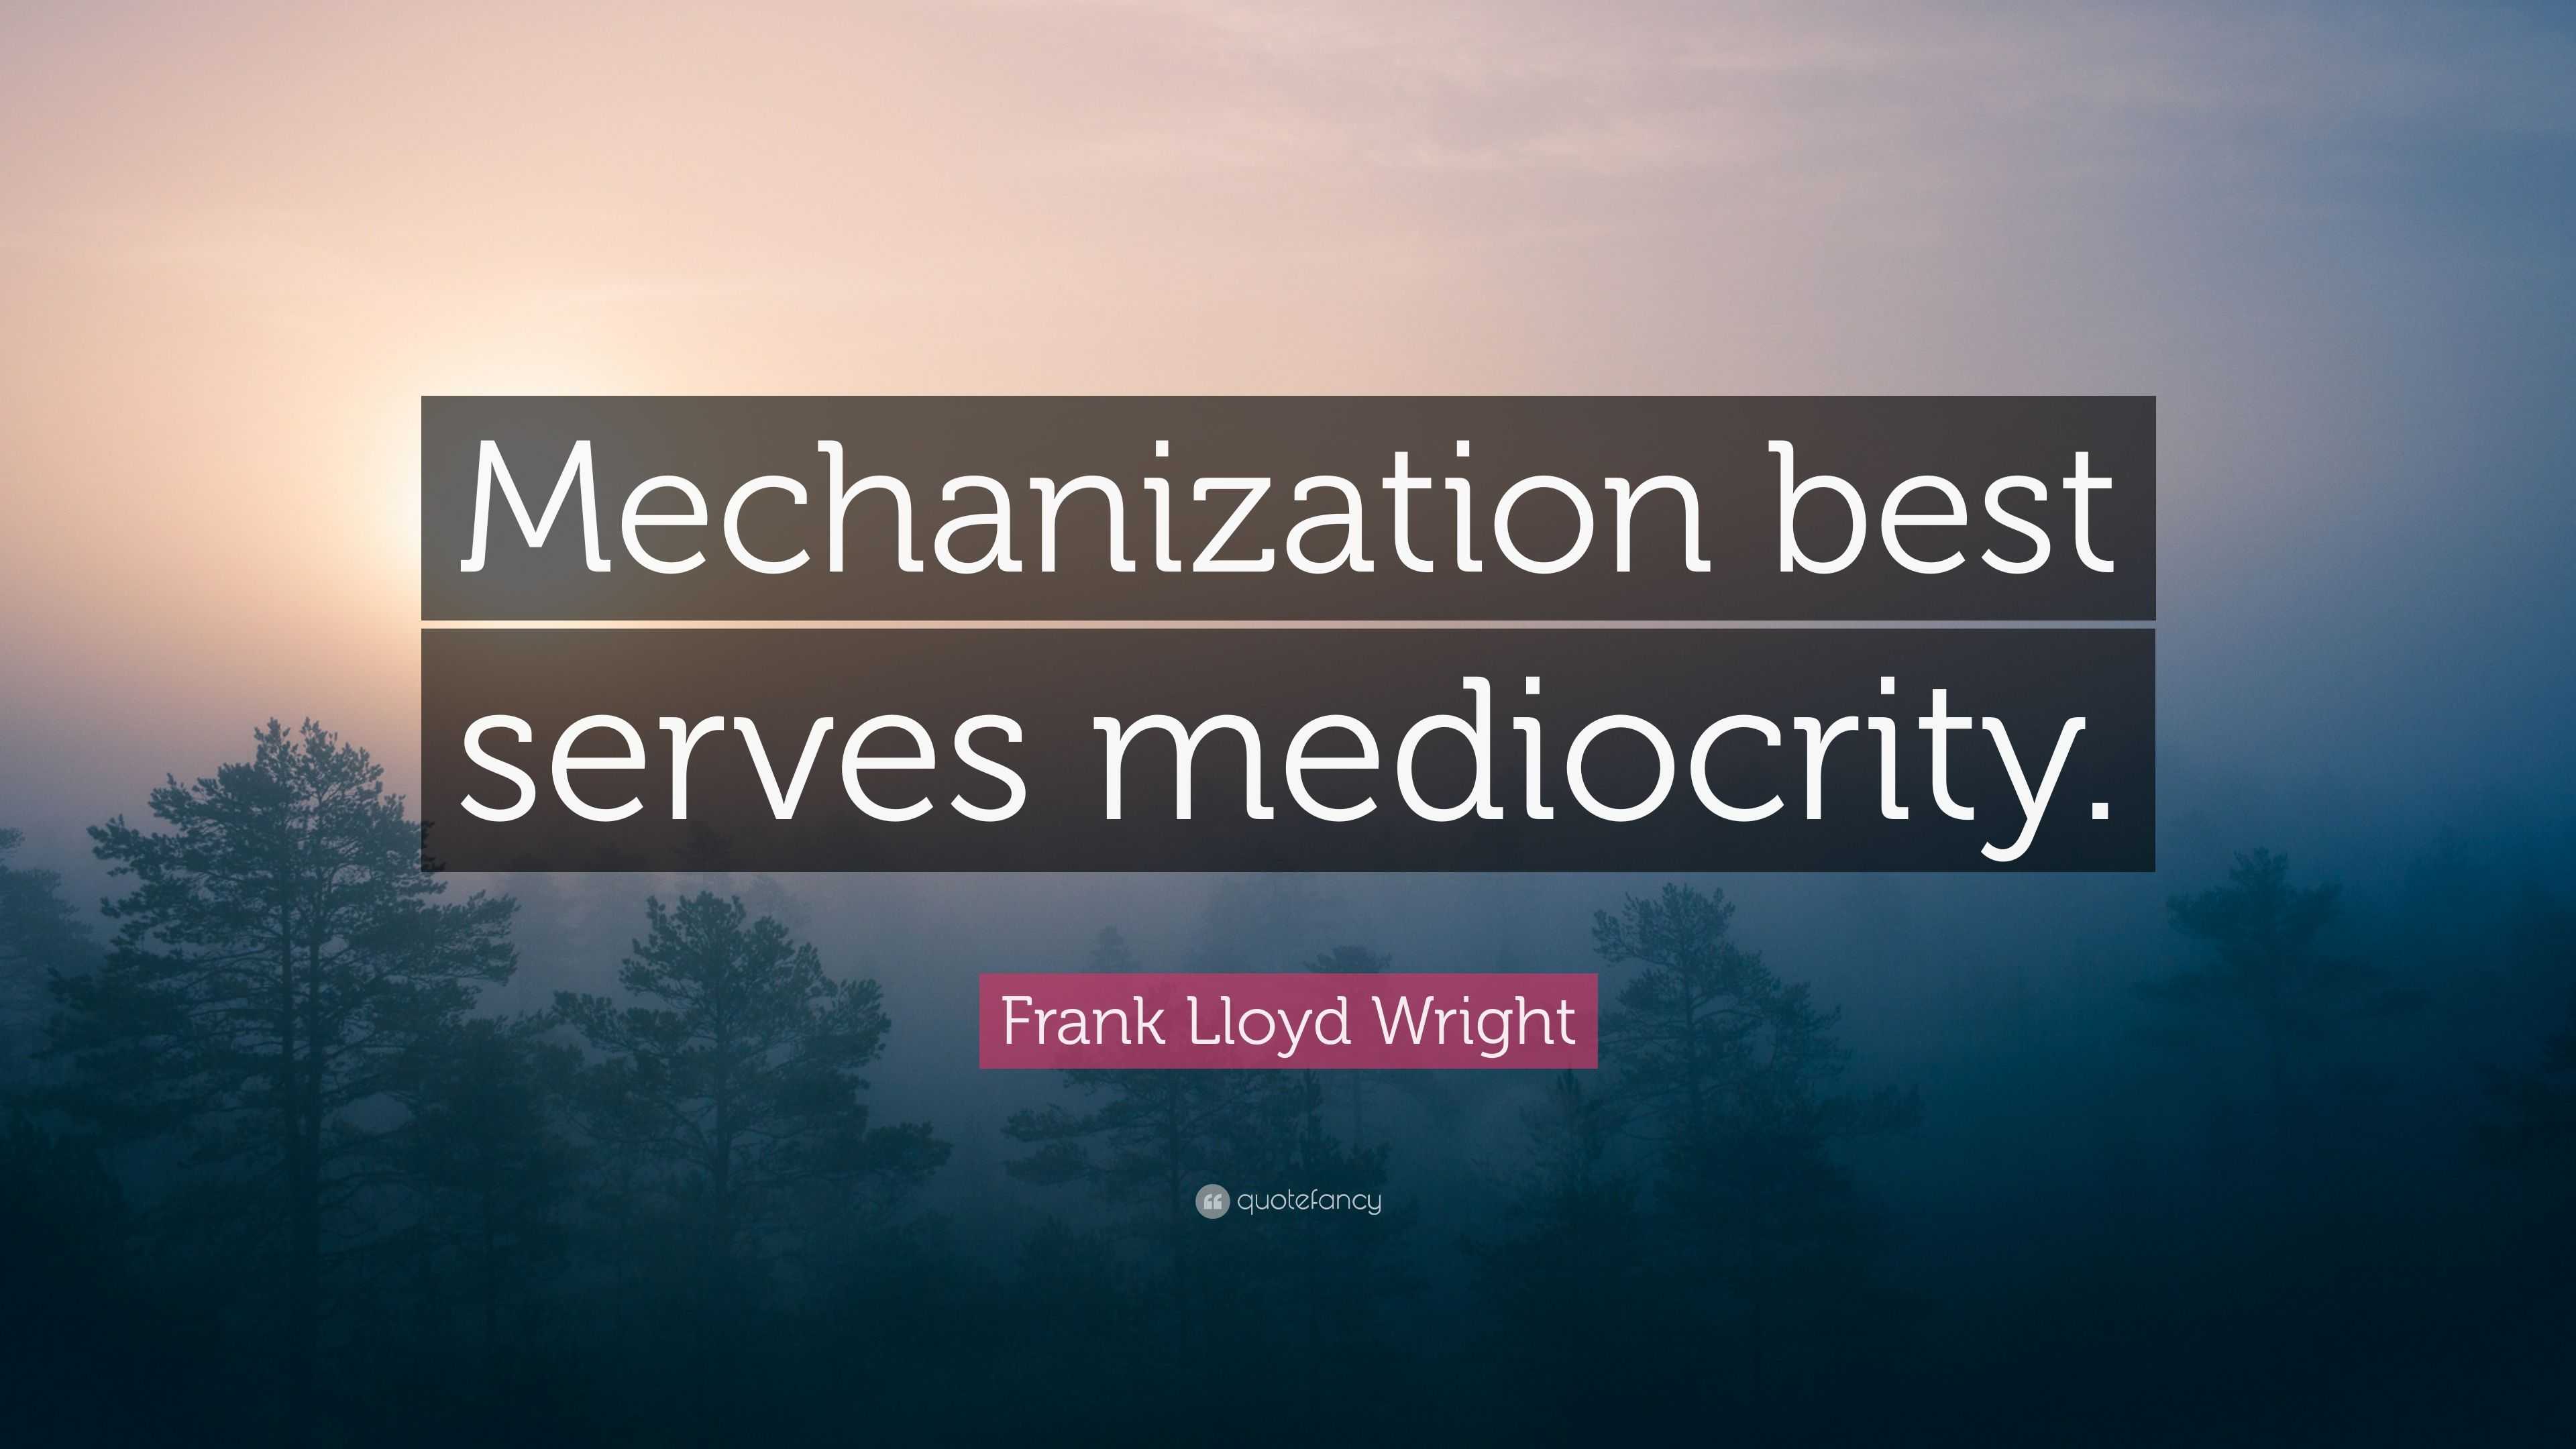 Frank Lloyd Wright Quote Mechanization Best Serves Mediocrity Images, Photos, Reviews